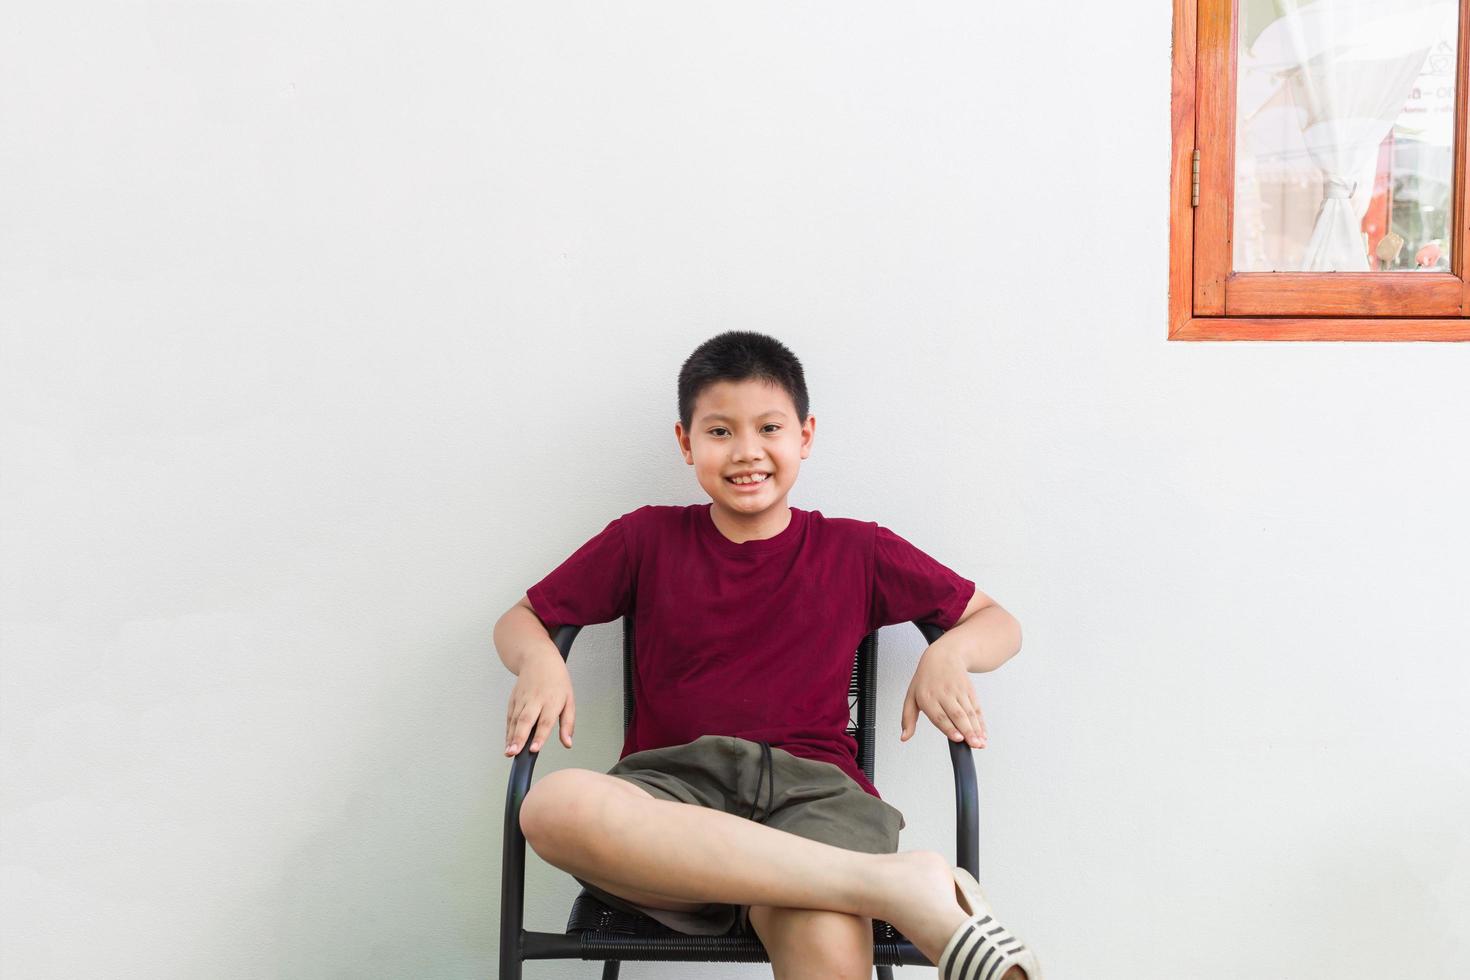 Thai Asian boy sitting in a chair smiling, looking handsome and fun on white cafe wall in holiday photo